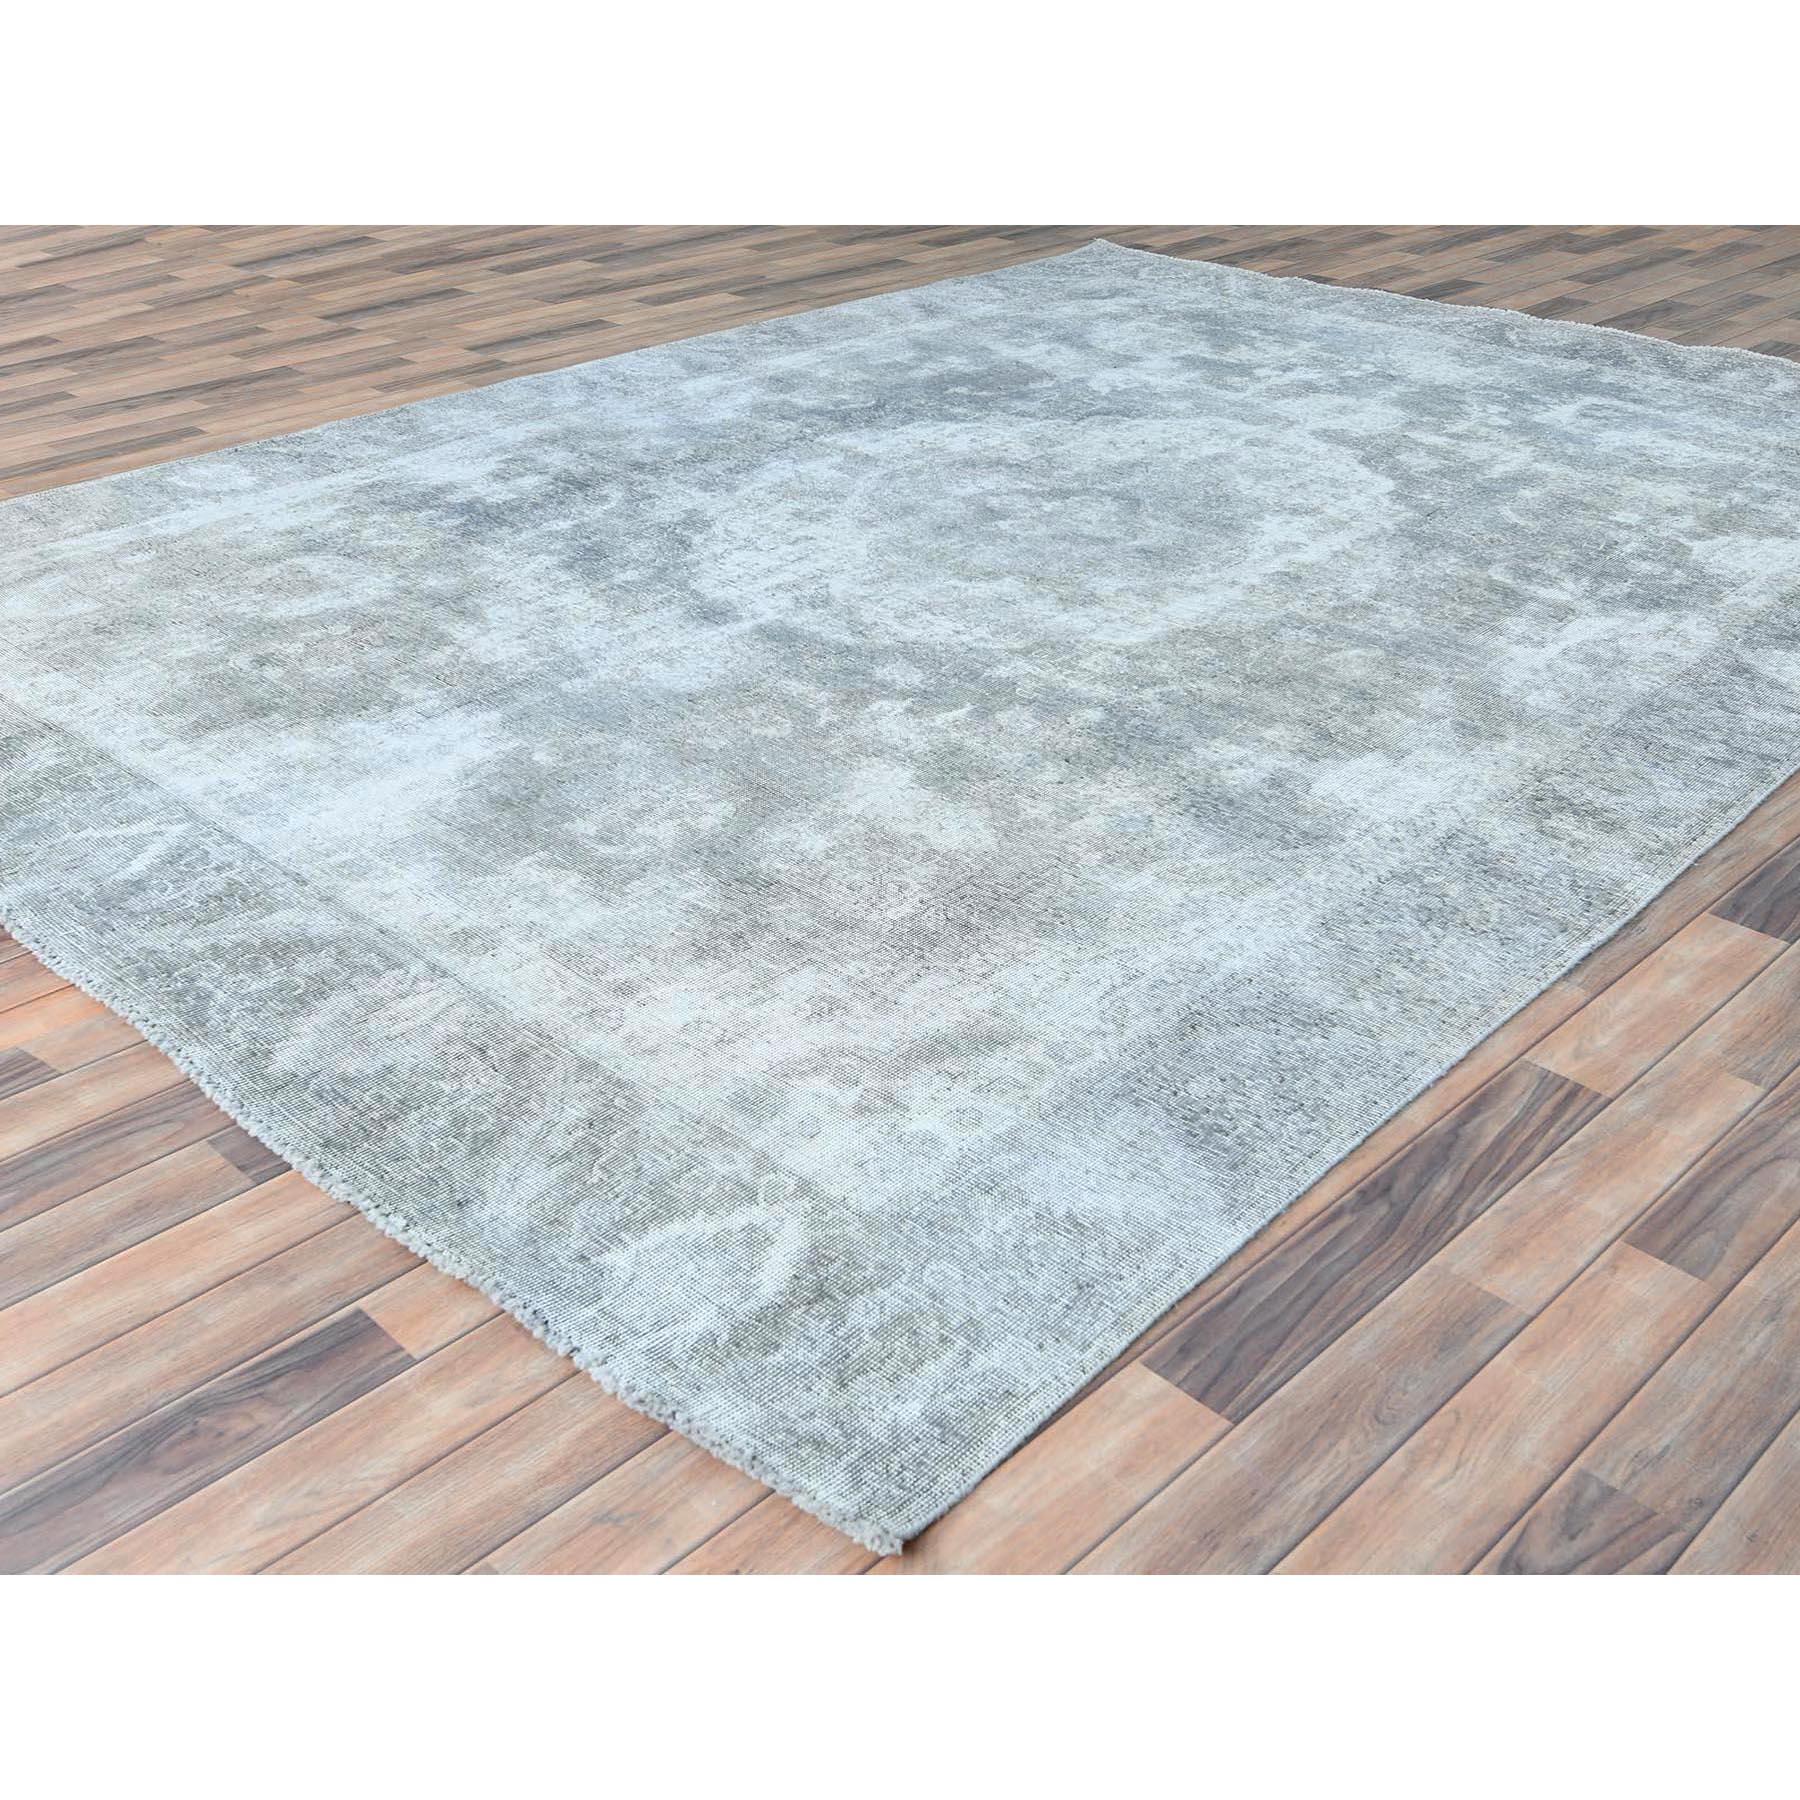 Medieval Blueish Grey Distressed Feel Worn Wool Hand Knotted Vintage Persian Tabriz Rug For Sale